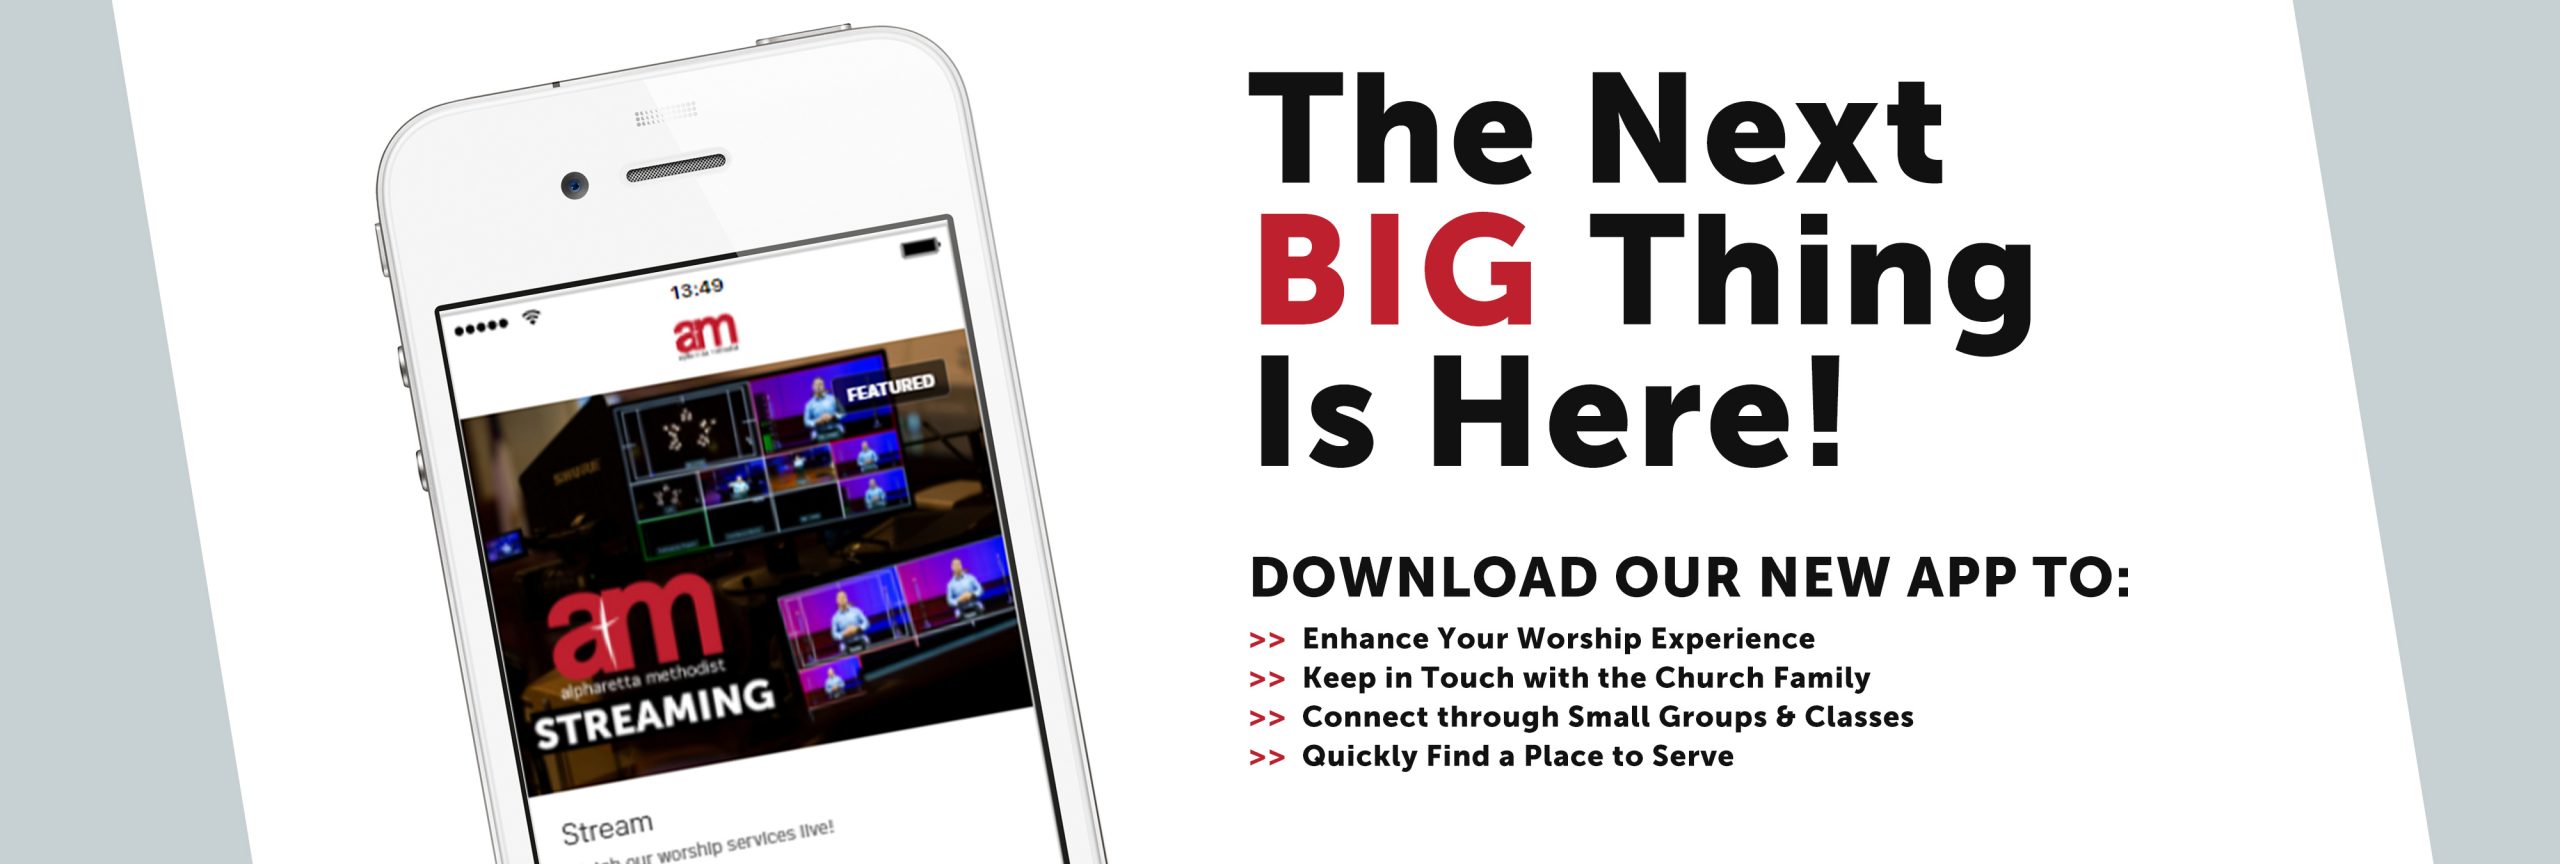 Now you can take Alpharetta Methodist with you. Alpharetta Methodist App: The Next BIG Thing Is Here!